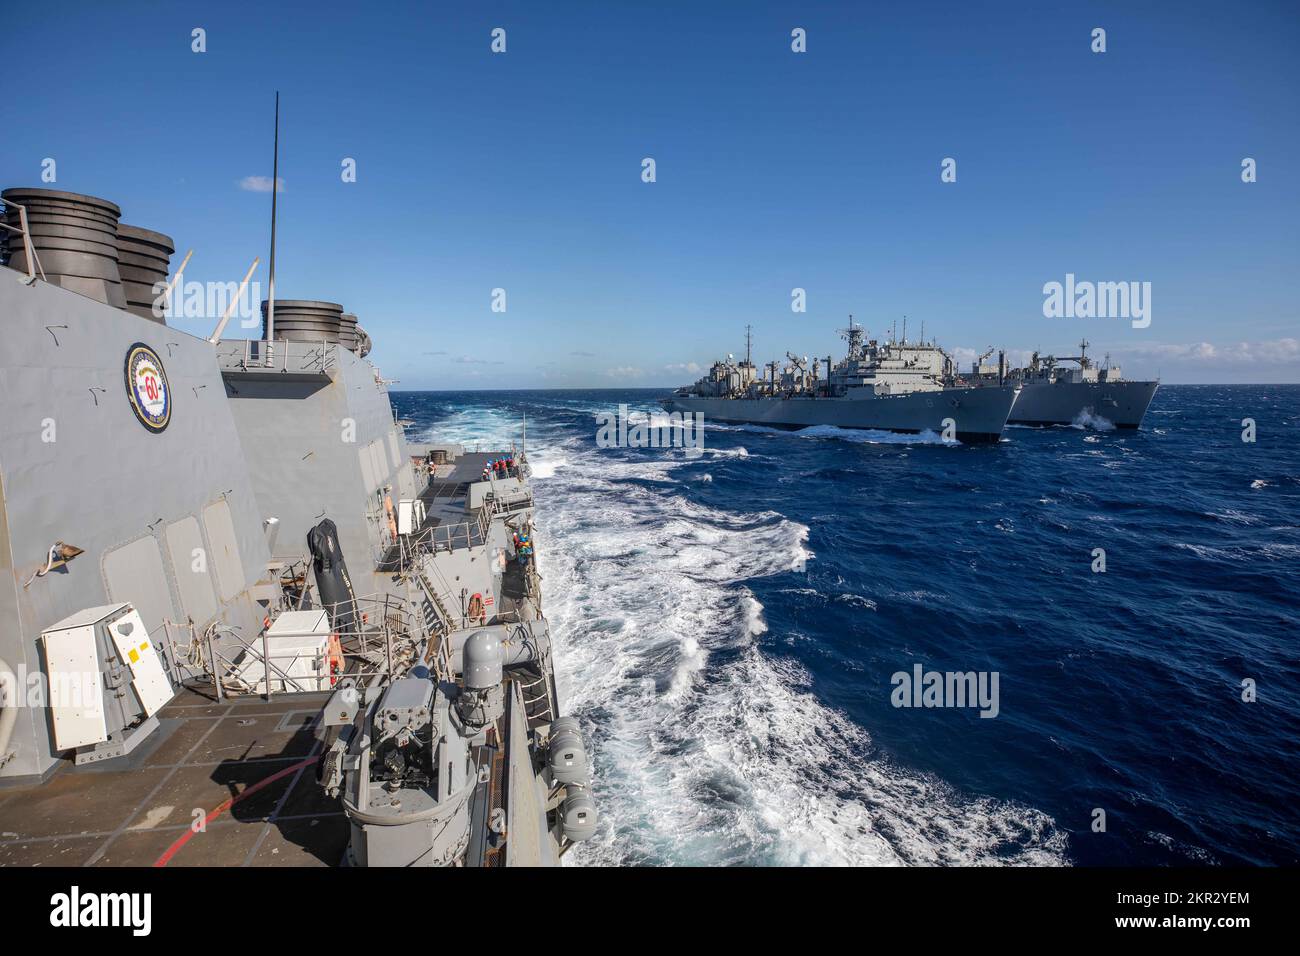 IONIAN SEA (Nov. 22, 2022) The Arleigh Burke-class guided-missile destroyer USS Roosevelt (DDG 80), left, breaks away from the fast combat support ship USNS Arctic (T-AOE 8), middle, and the Lewis and Clark-class dry cargo and ammunition ship USNS William McLean (T-AKE 12), right, after completing a replenishment-at-sea, Nov. 22, 2022. Roosevelt is on a scheduled deployment in the U.S. Naval Forces Europe area of operations, employed by U.S. Sixth Fleet to defend U.S., allied and partner interests. (U.S. Navy photo by Mass Communication Specialist 2nd Class Danielle Baker/Released) Stock Photo